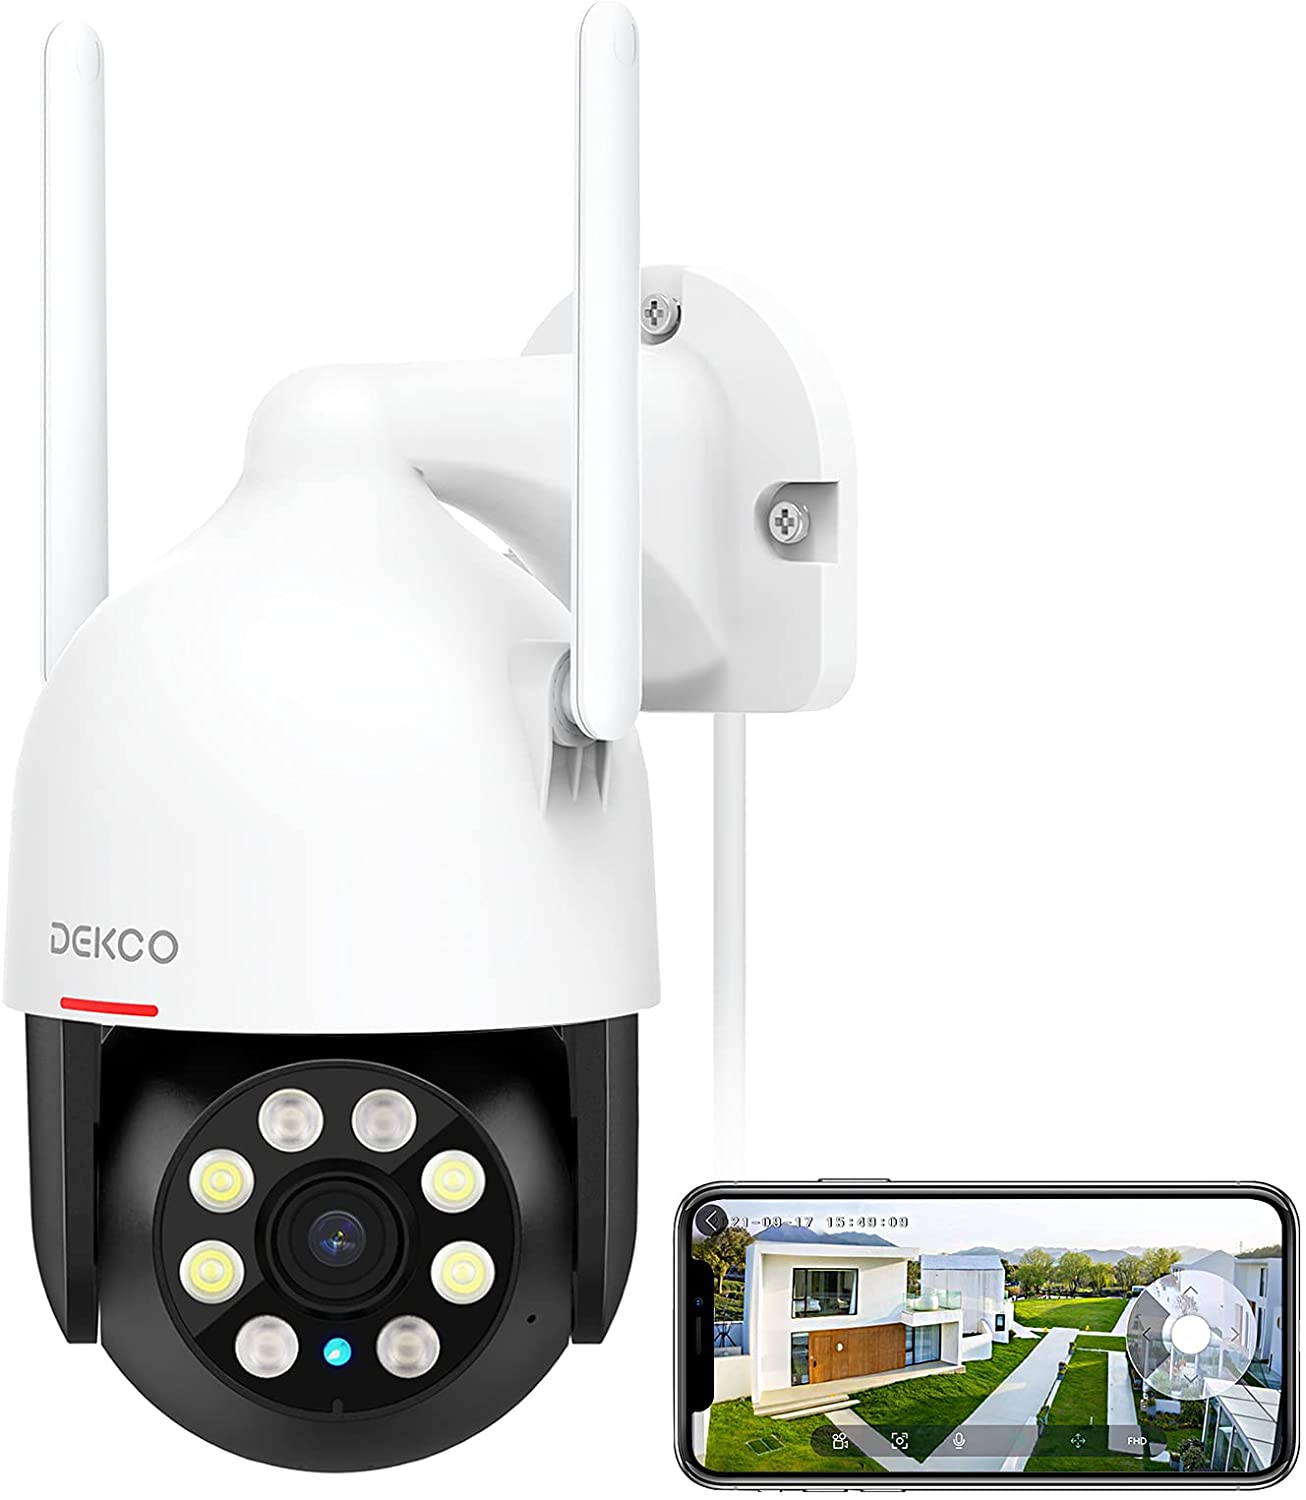 Security Camera Outdoor/Home, DEKCO WiFi Outdoor Security Cameras Pan-Tilt 360? View, 1080P Dome Surveillance Cameras with Motion Detection and Siren, 2-Way Audio,Full Color Night Vision, Waterproof